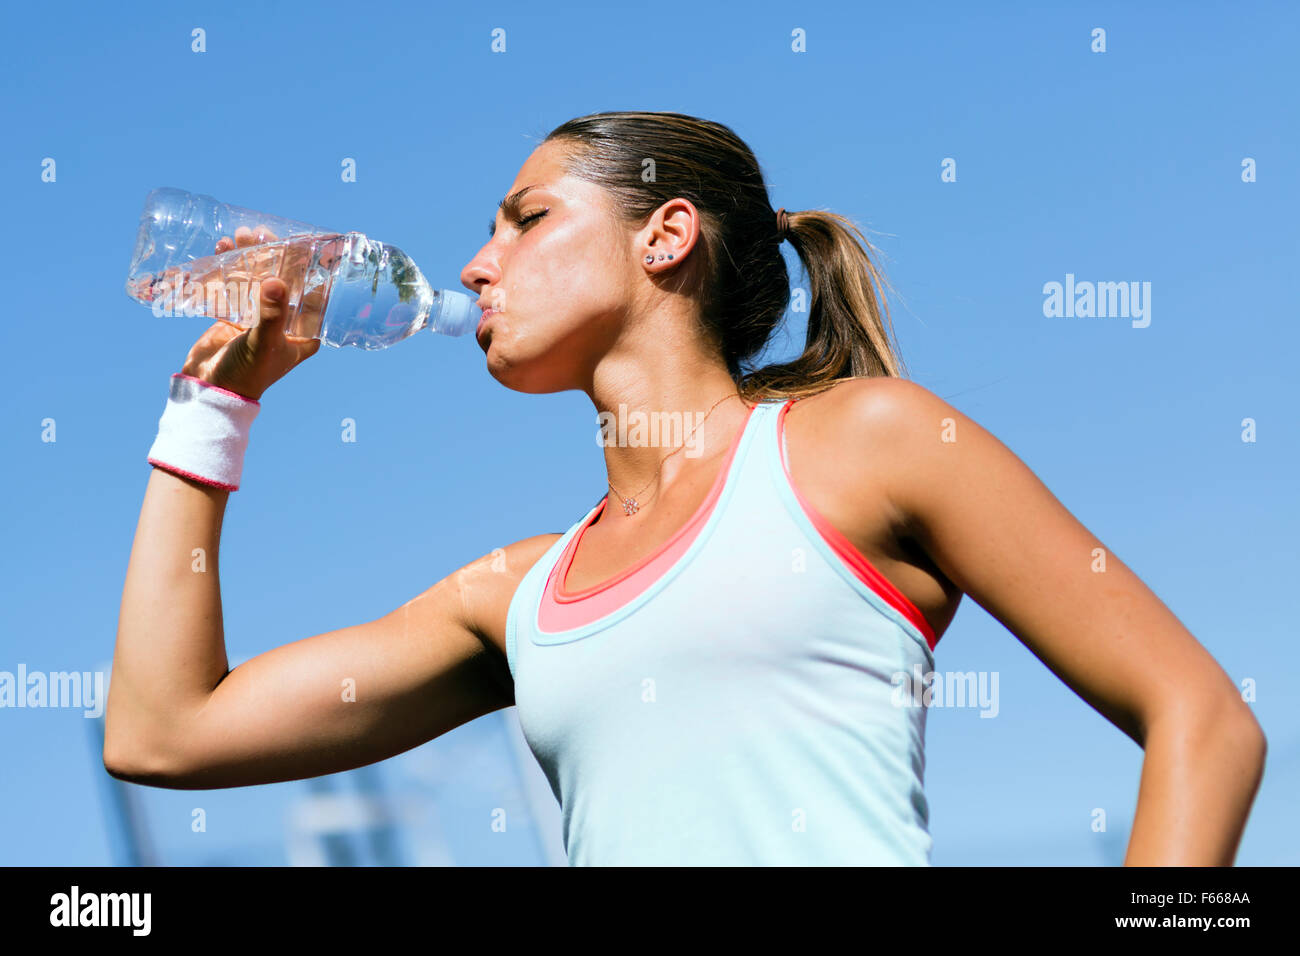 Young beautiful athlete drinking water after exercising to revitalize Stock Photo